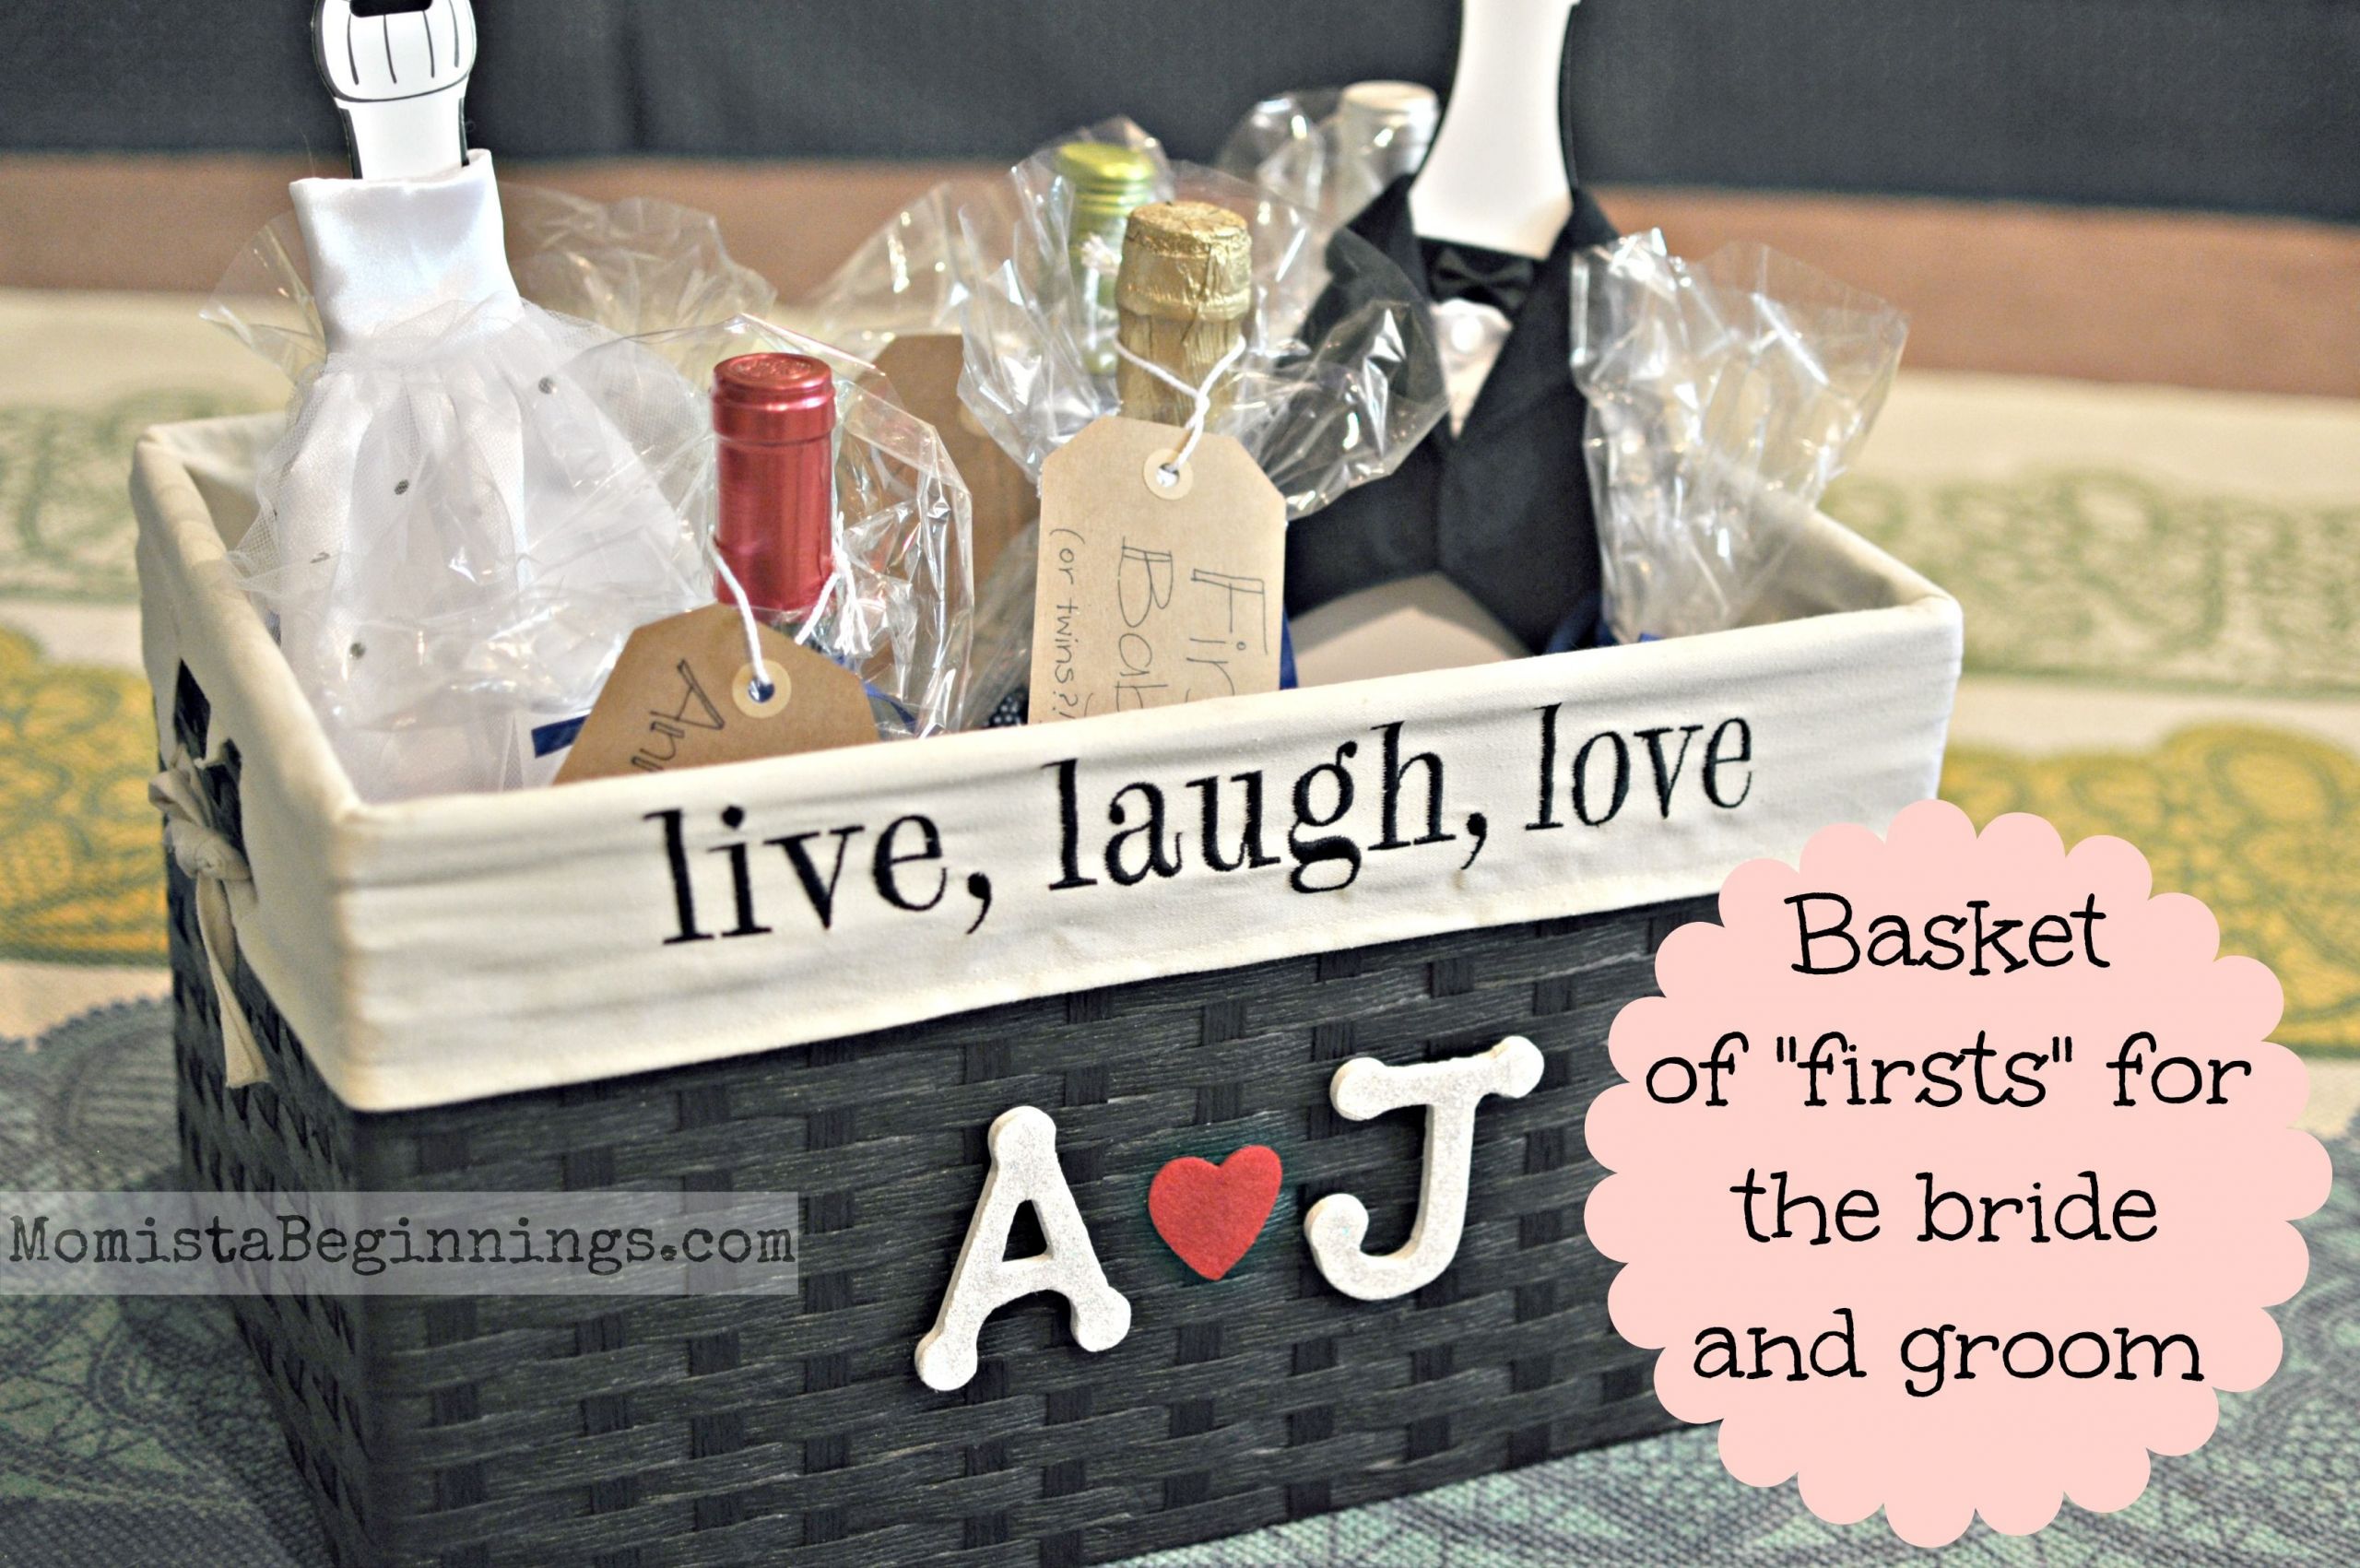 Wedding Gift Basket Ideas For Bride And Groom
 Basket of "firsts" bridal shower t This idea includes